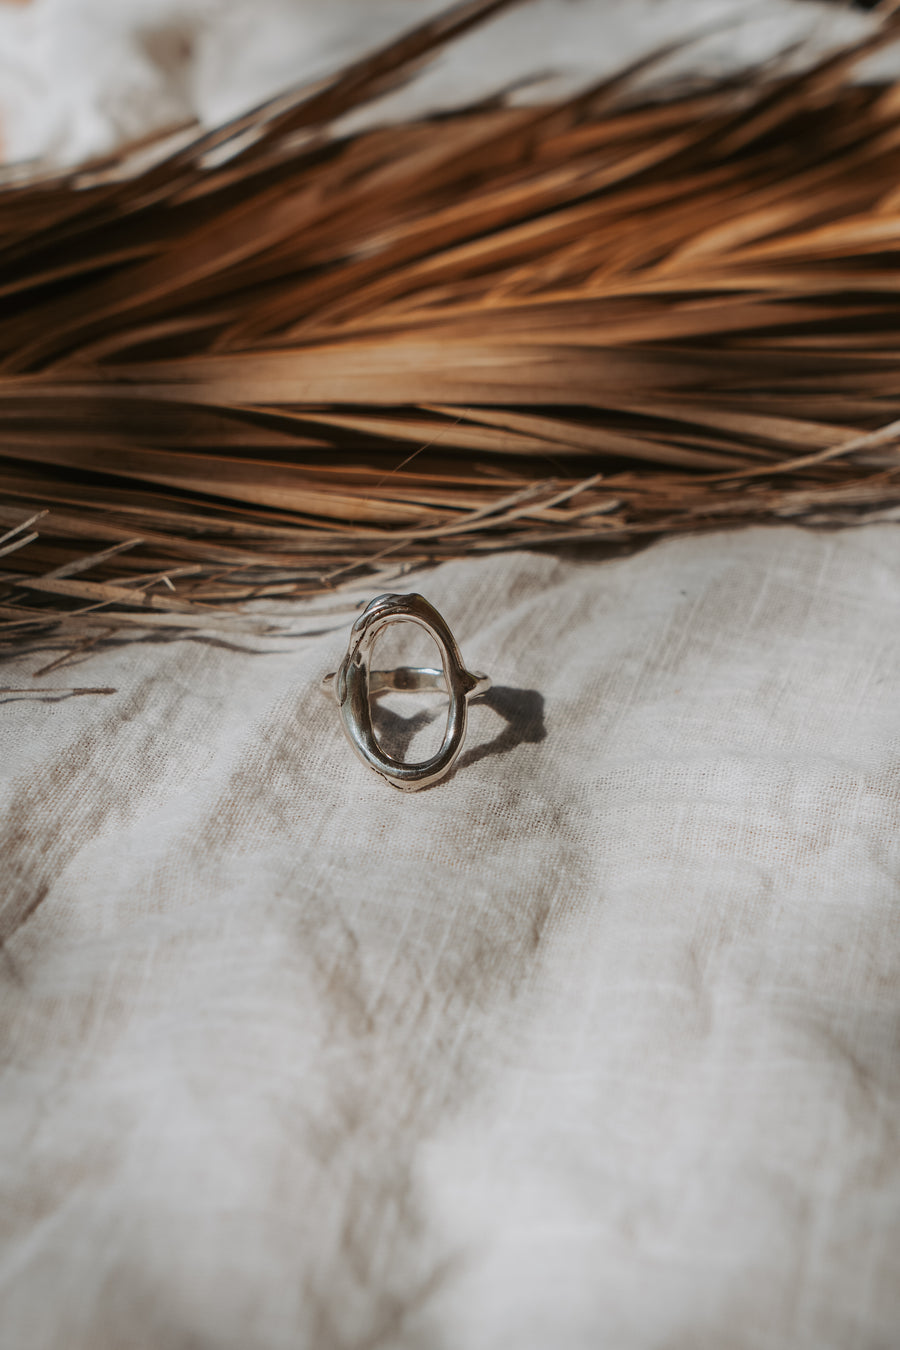 The Intueri Ring (Size 5.5)